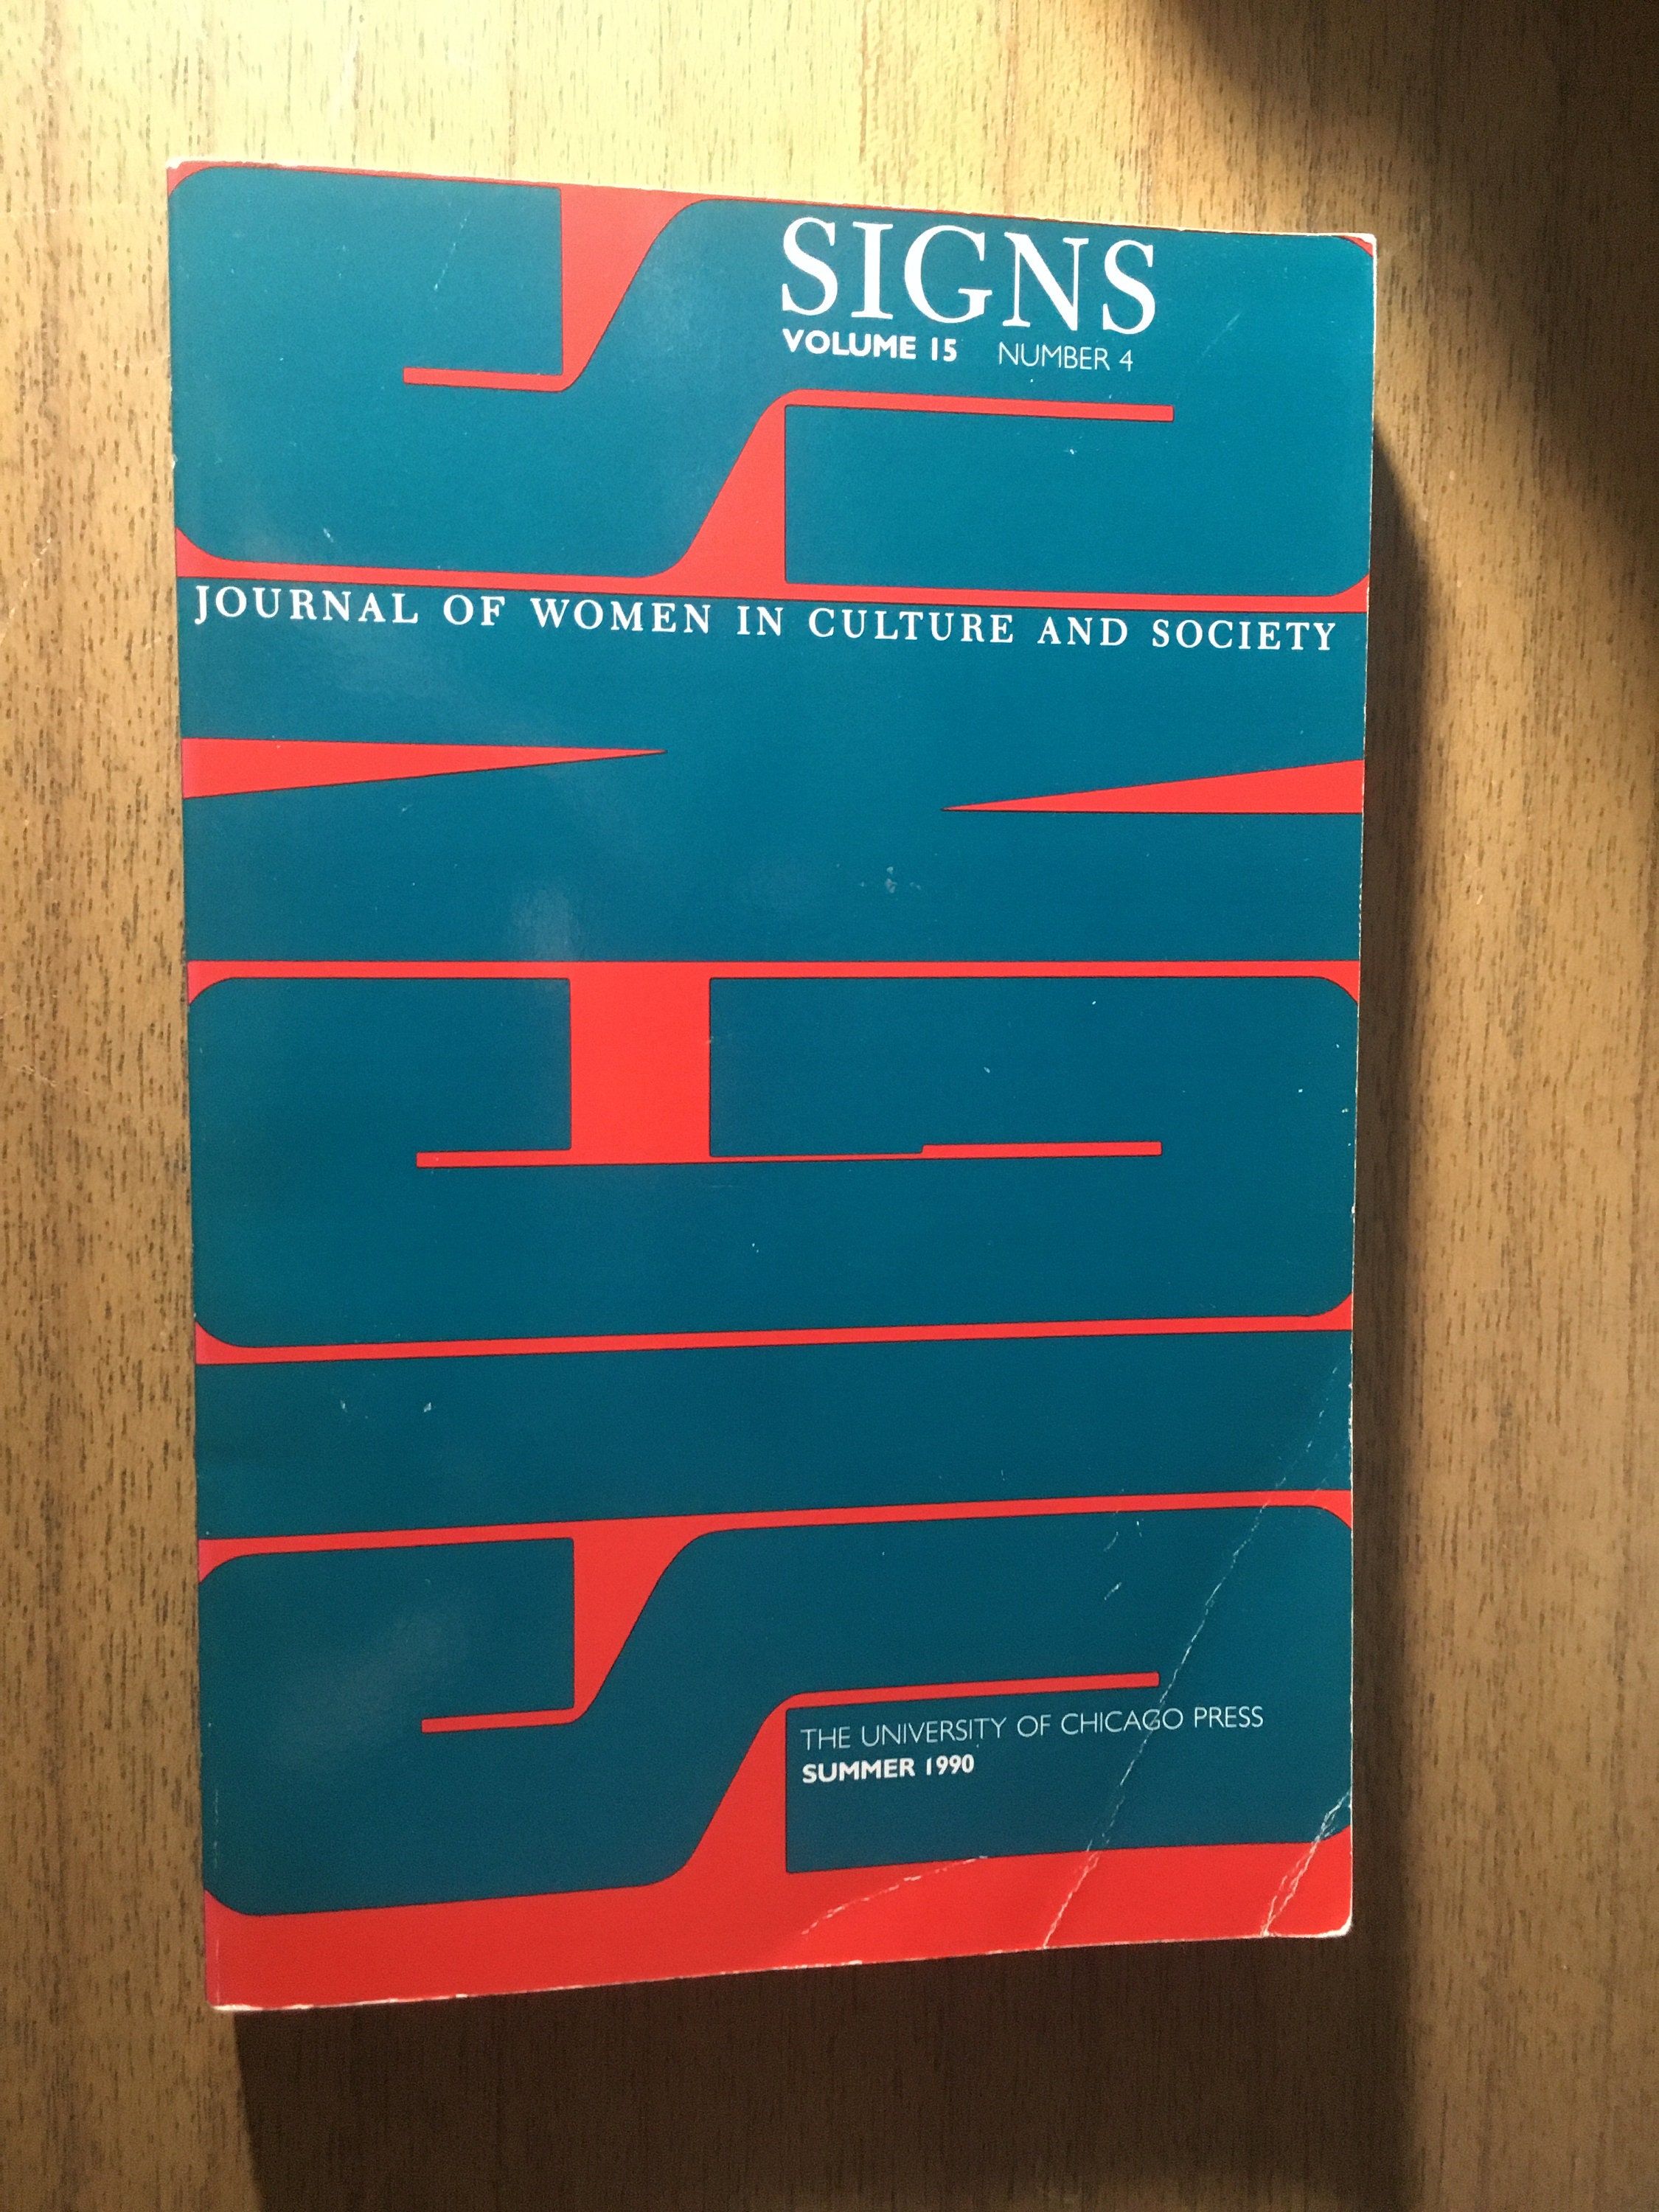 Signs: Journal of Women in Culture and Society